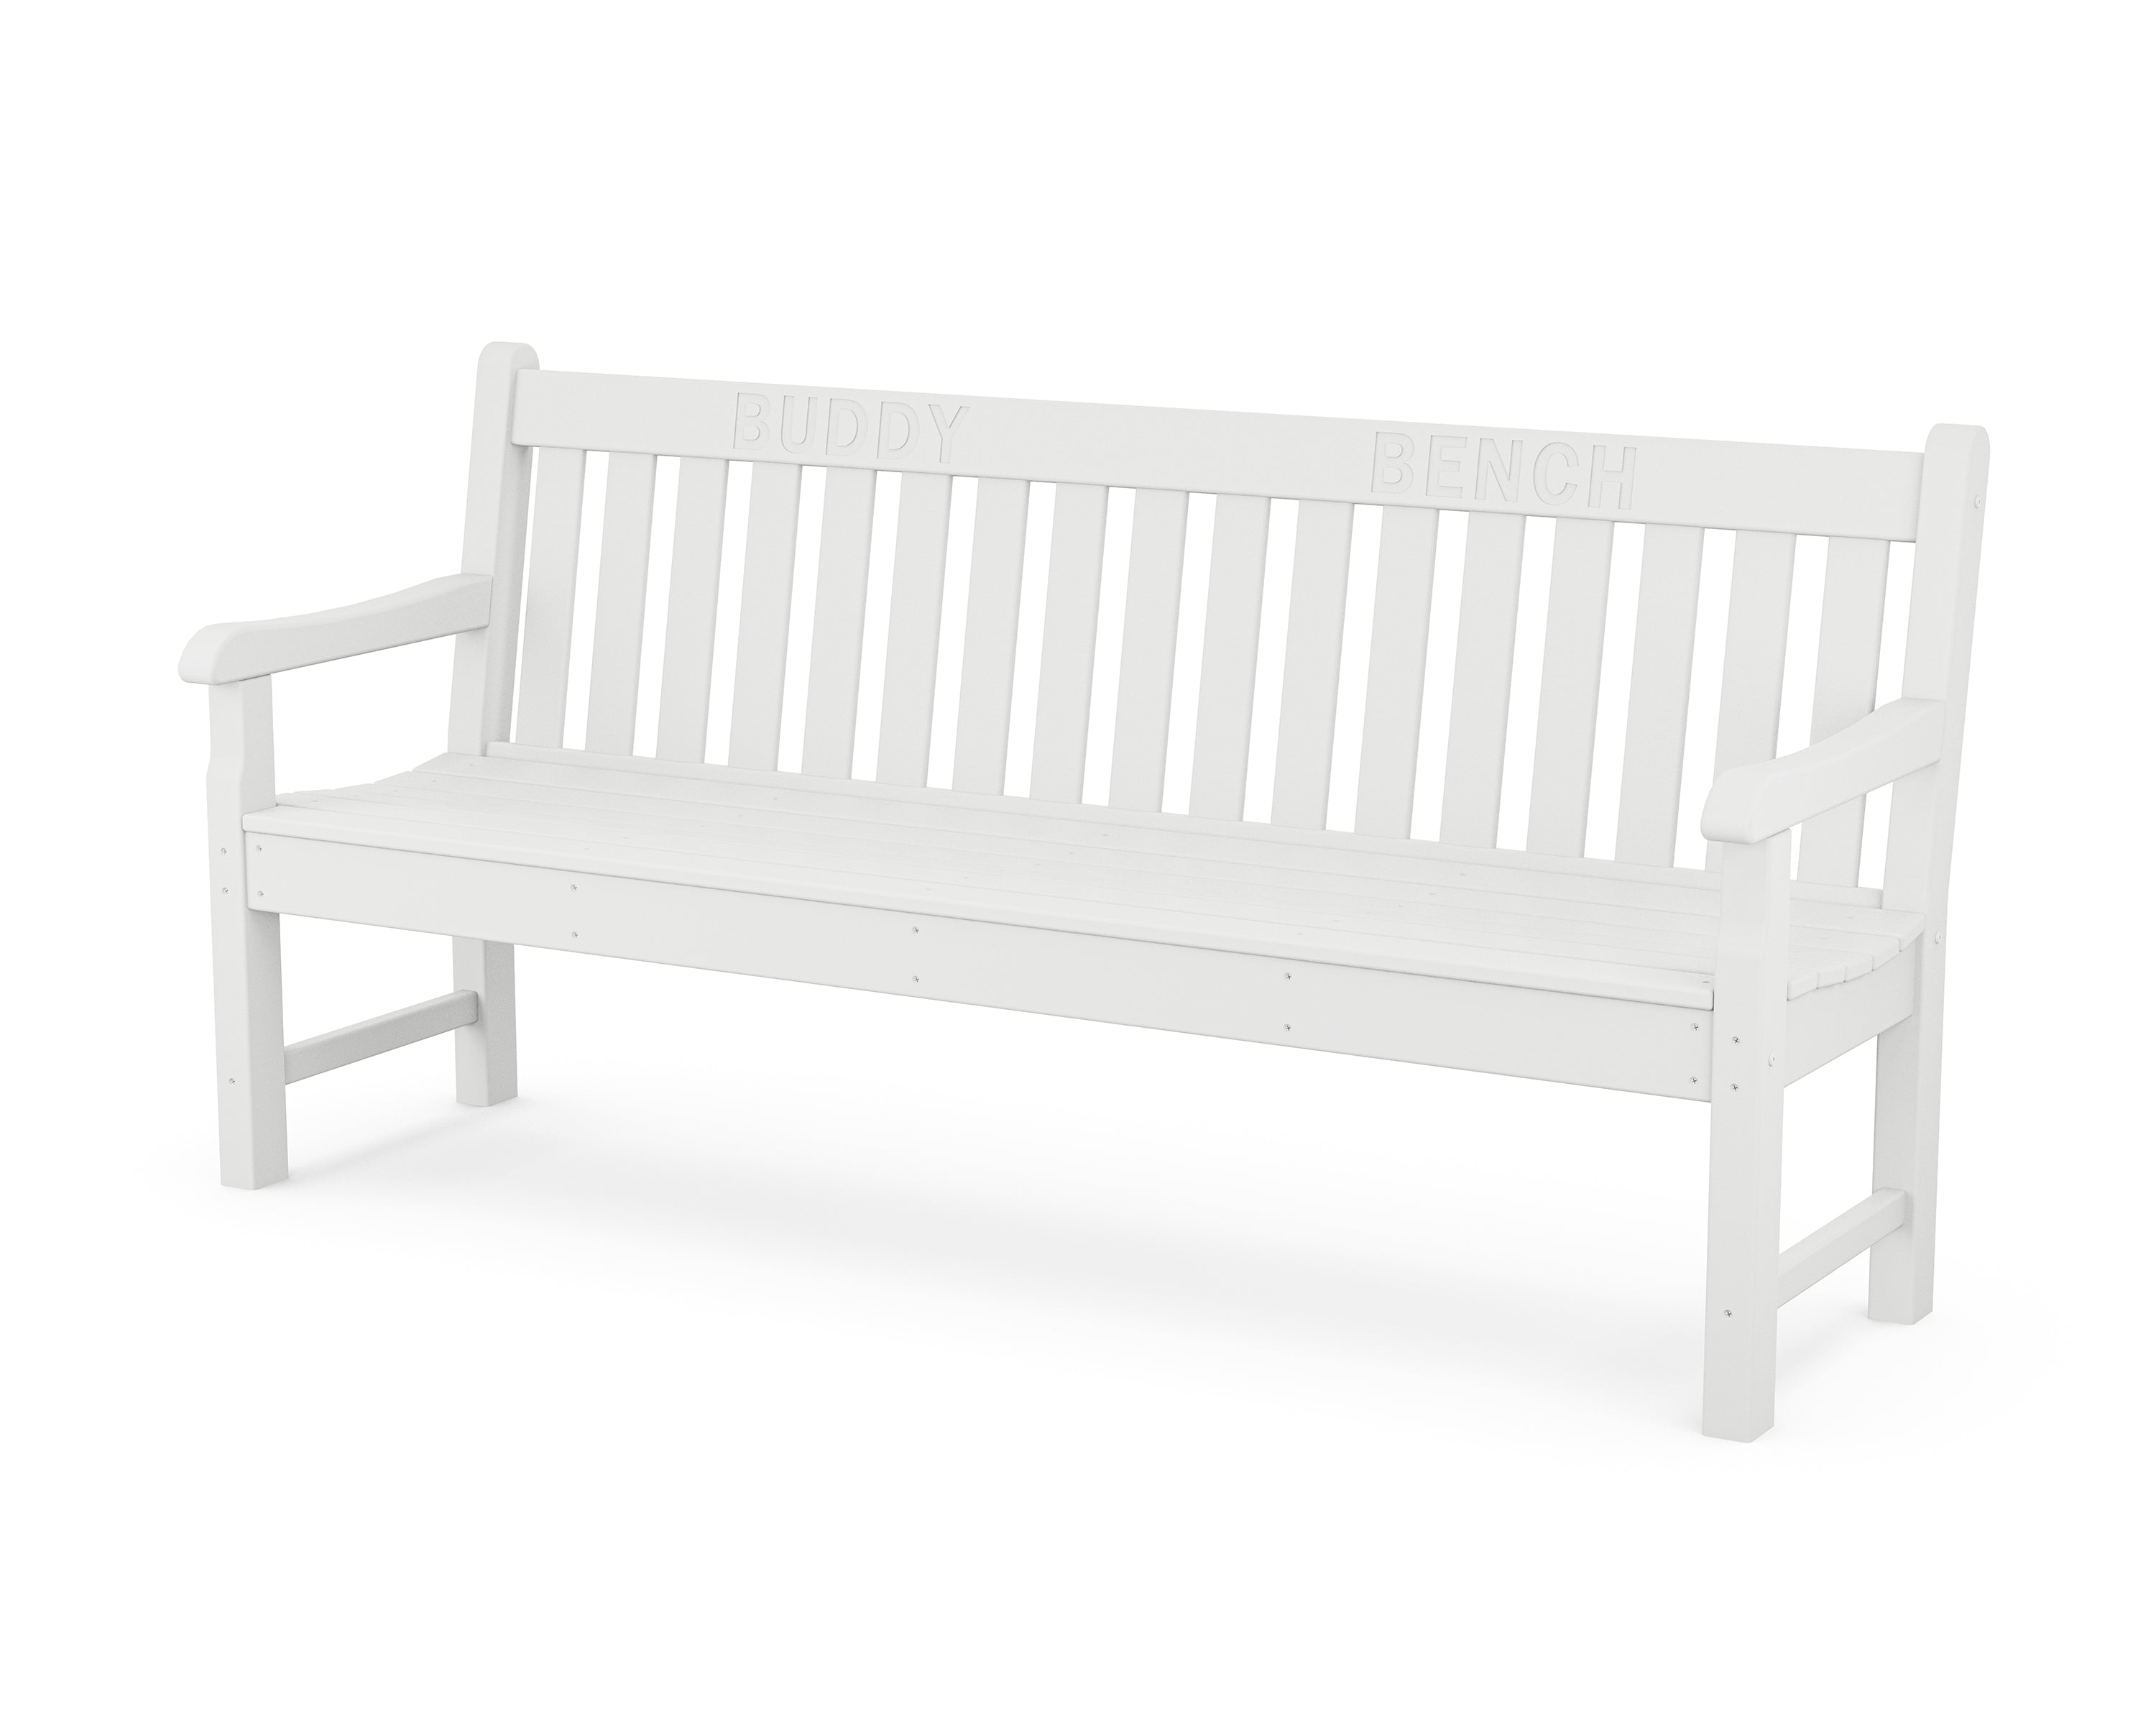 POLYWOOD® 72” Buddy Bench in White